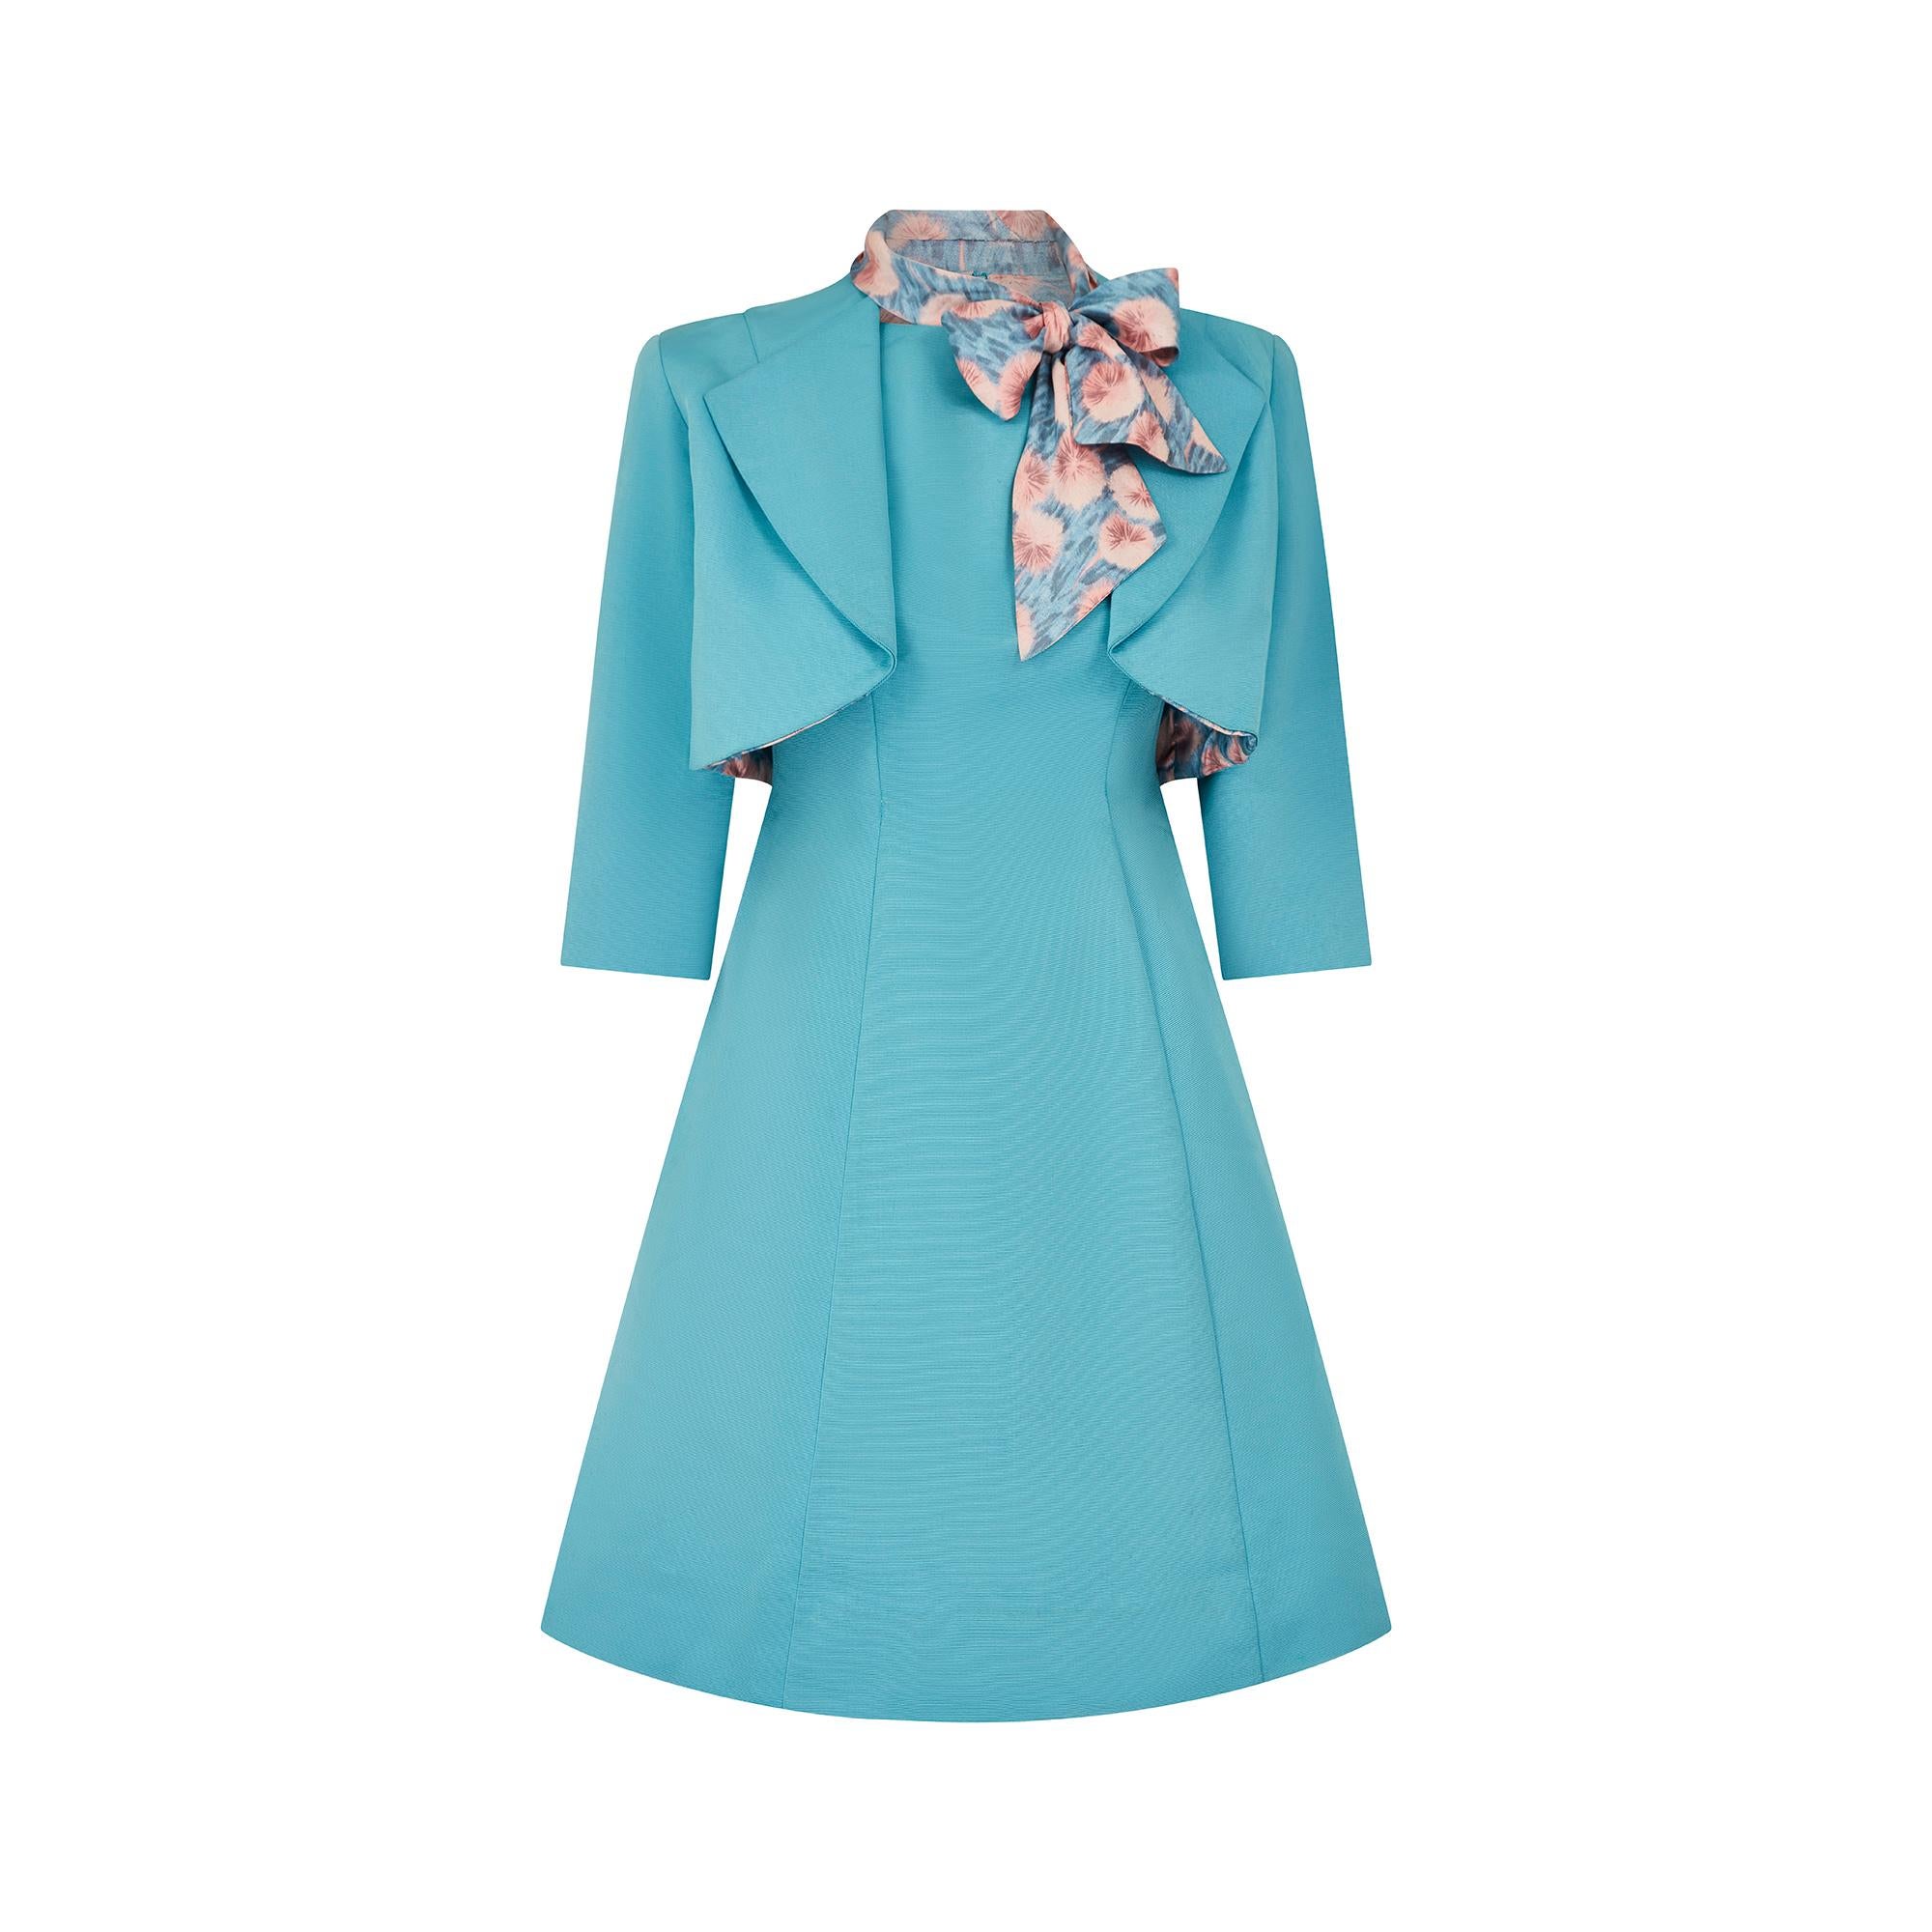 Crafted from silk faille fabric in vibrant aqua blue, this two-piece dress suit was couture made in France during the 1960s. The jacket is cut in a cropped bolero style, with a wide collar and waterfall tailoring.  The three-quarter length sleeves